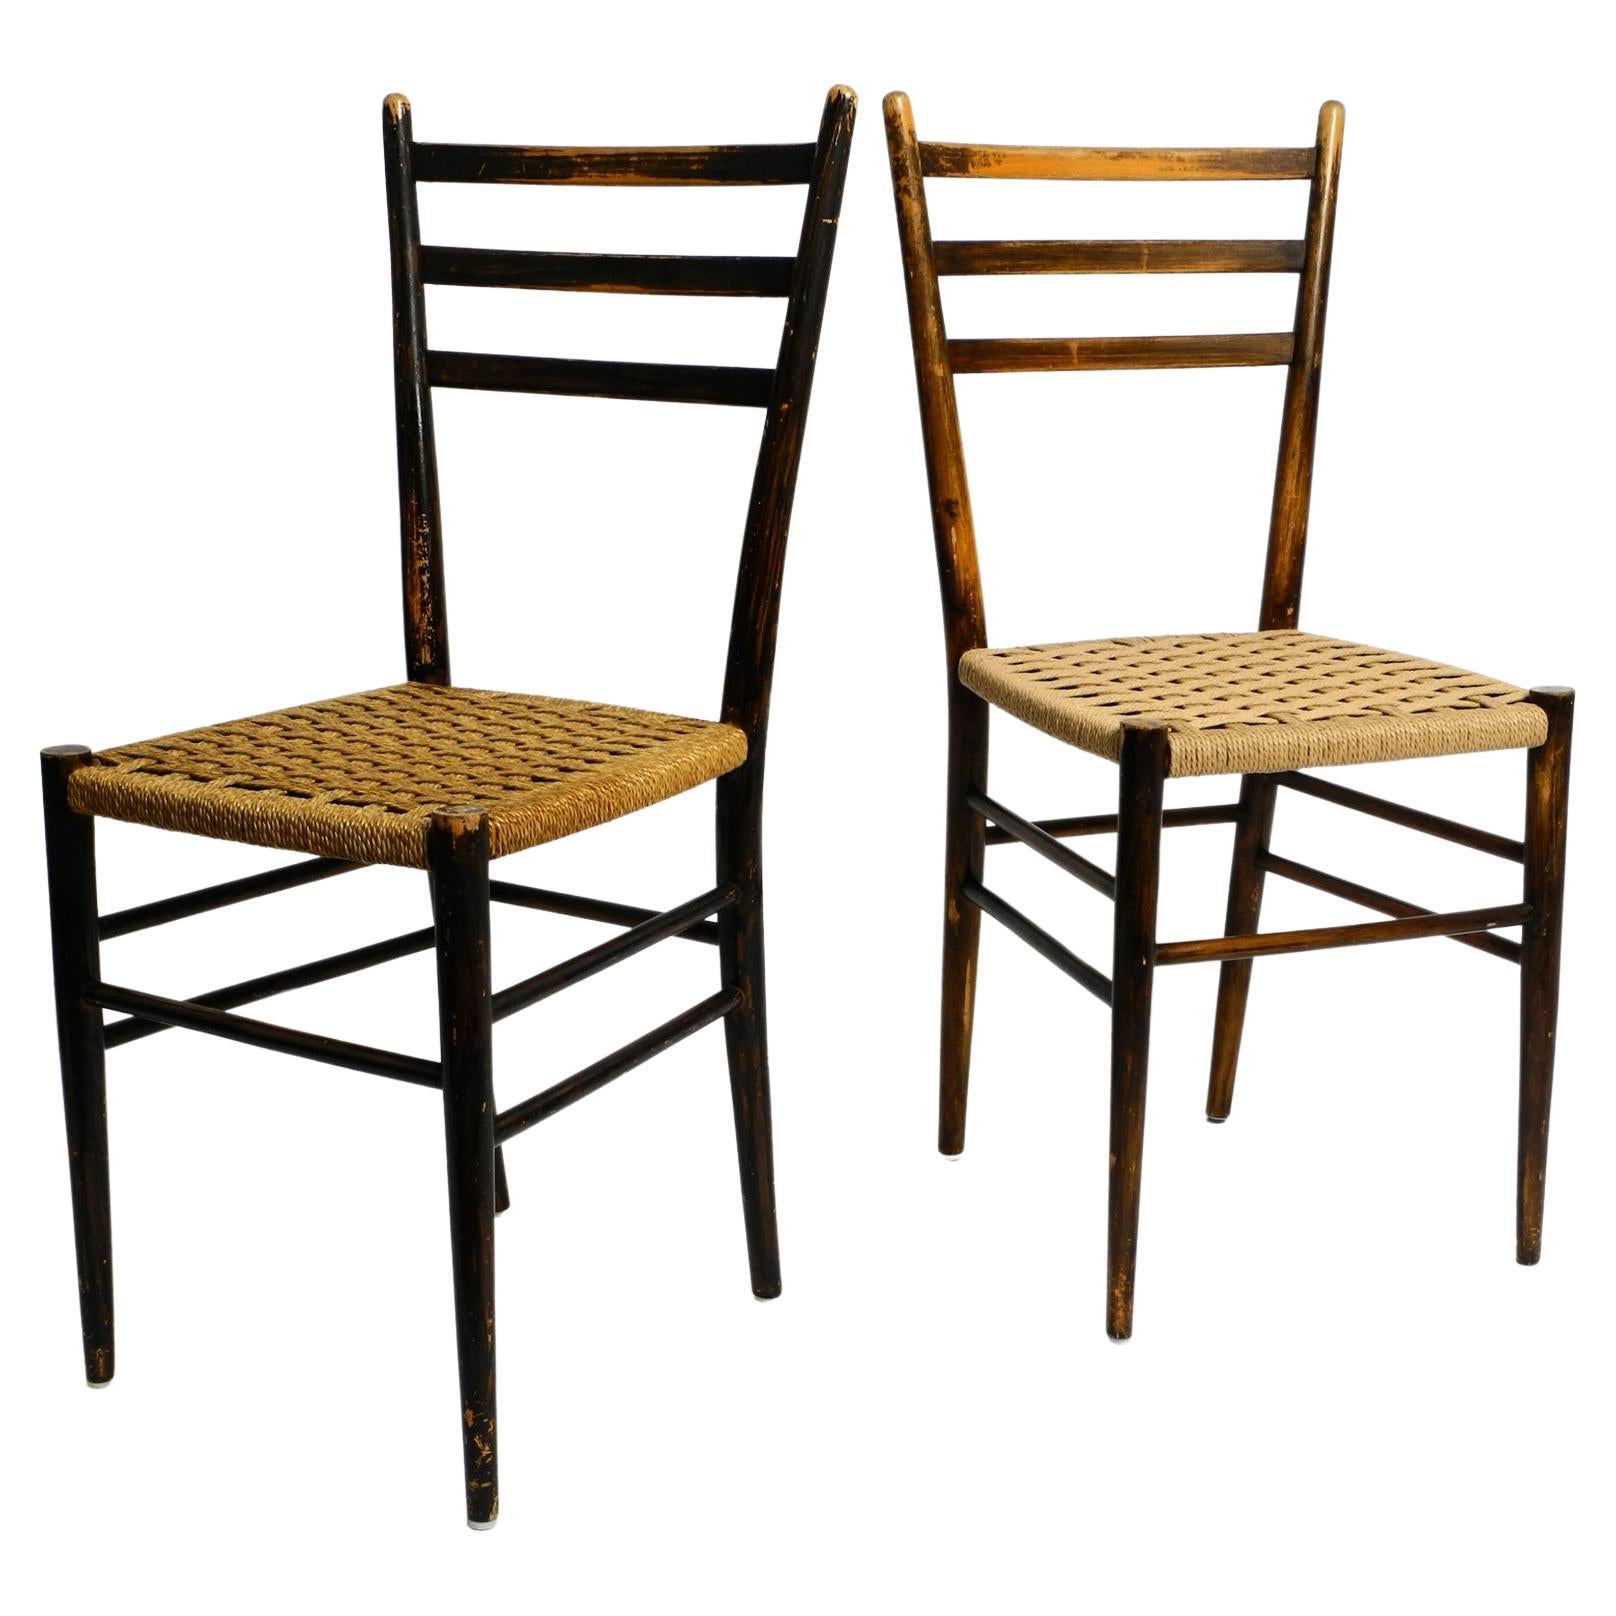 Pair of Mid-Century Italian Wooden Dining Chairs with Wicker Cord Seats For Sale